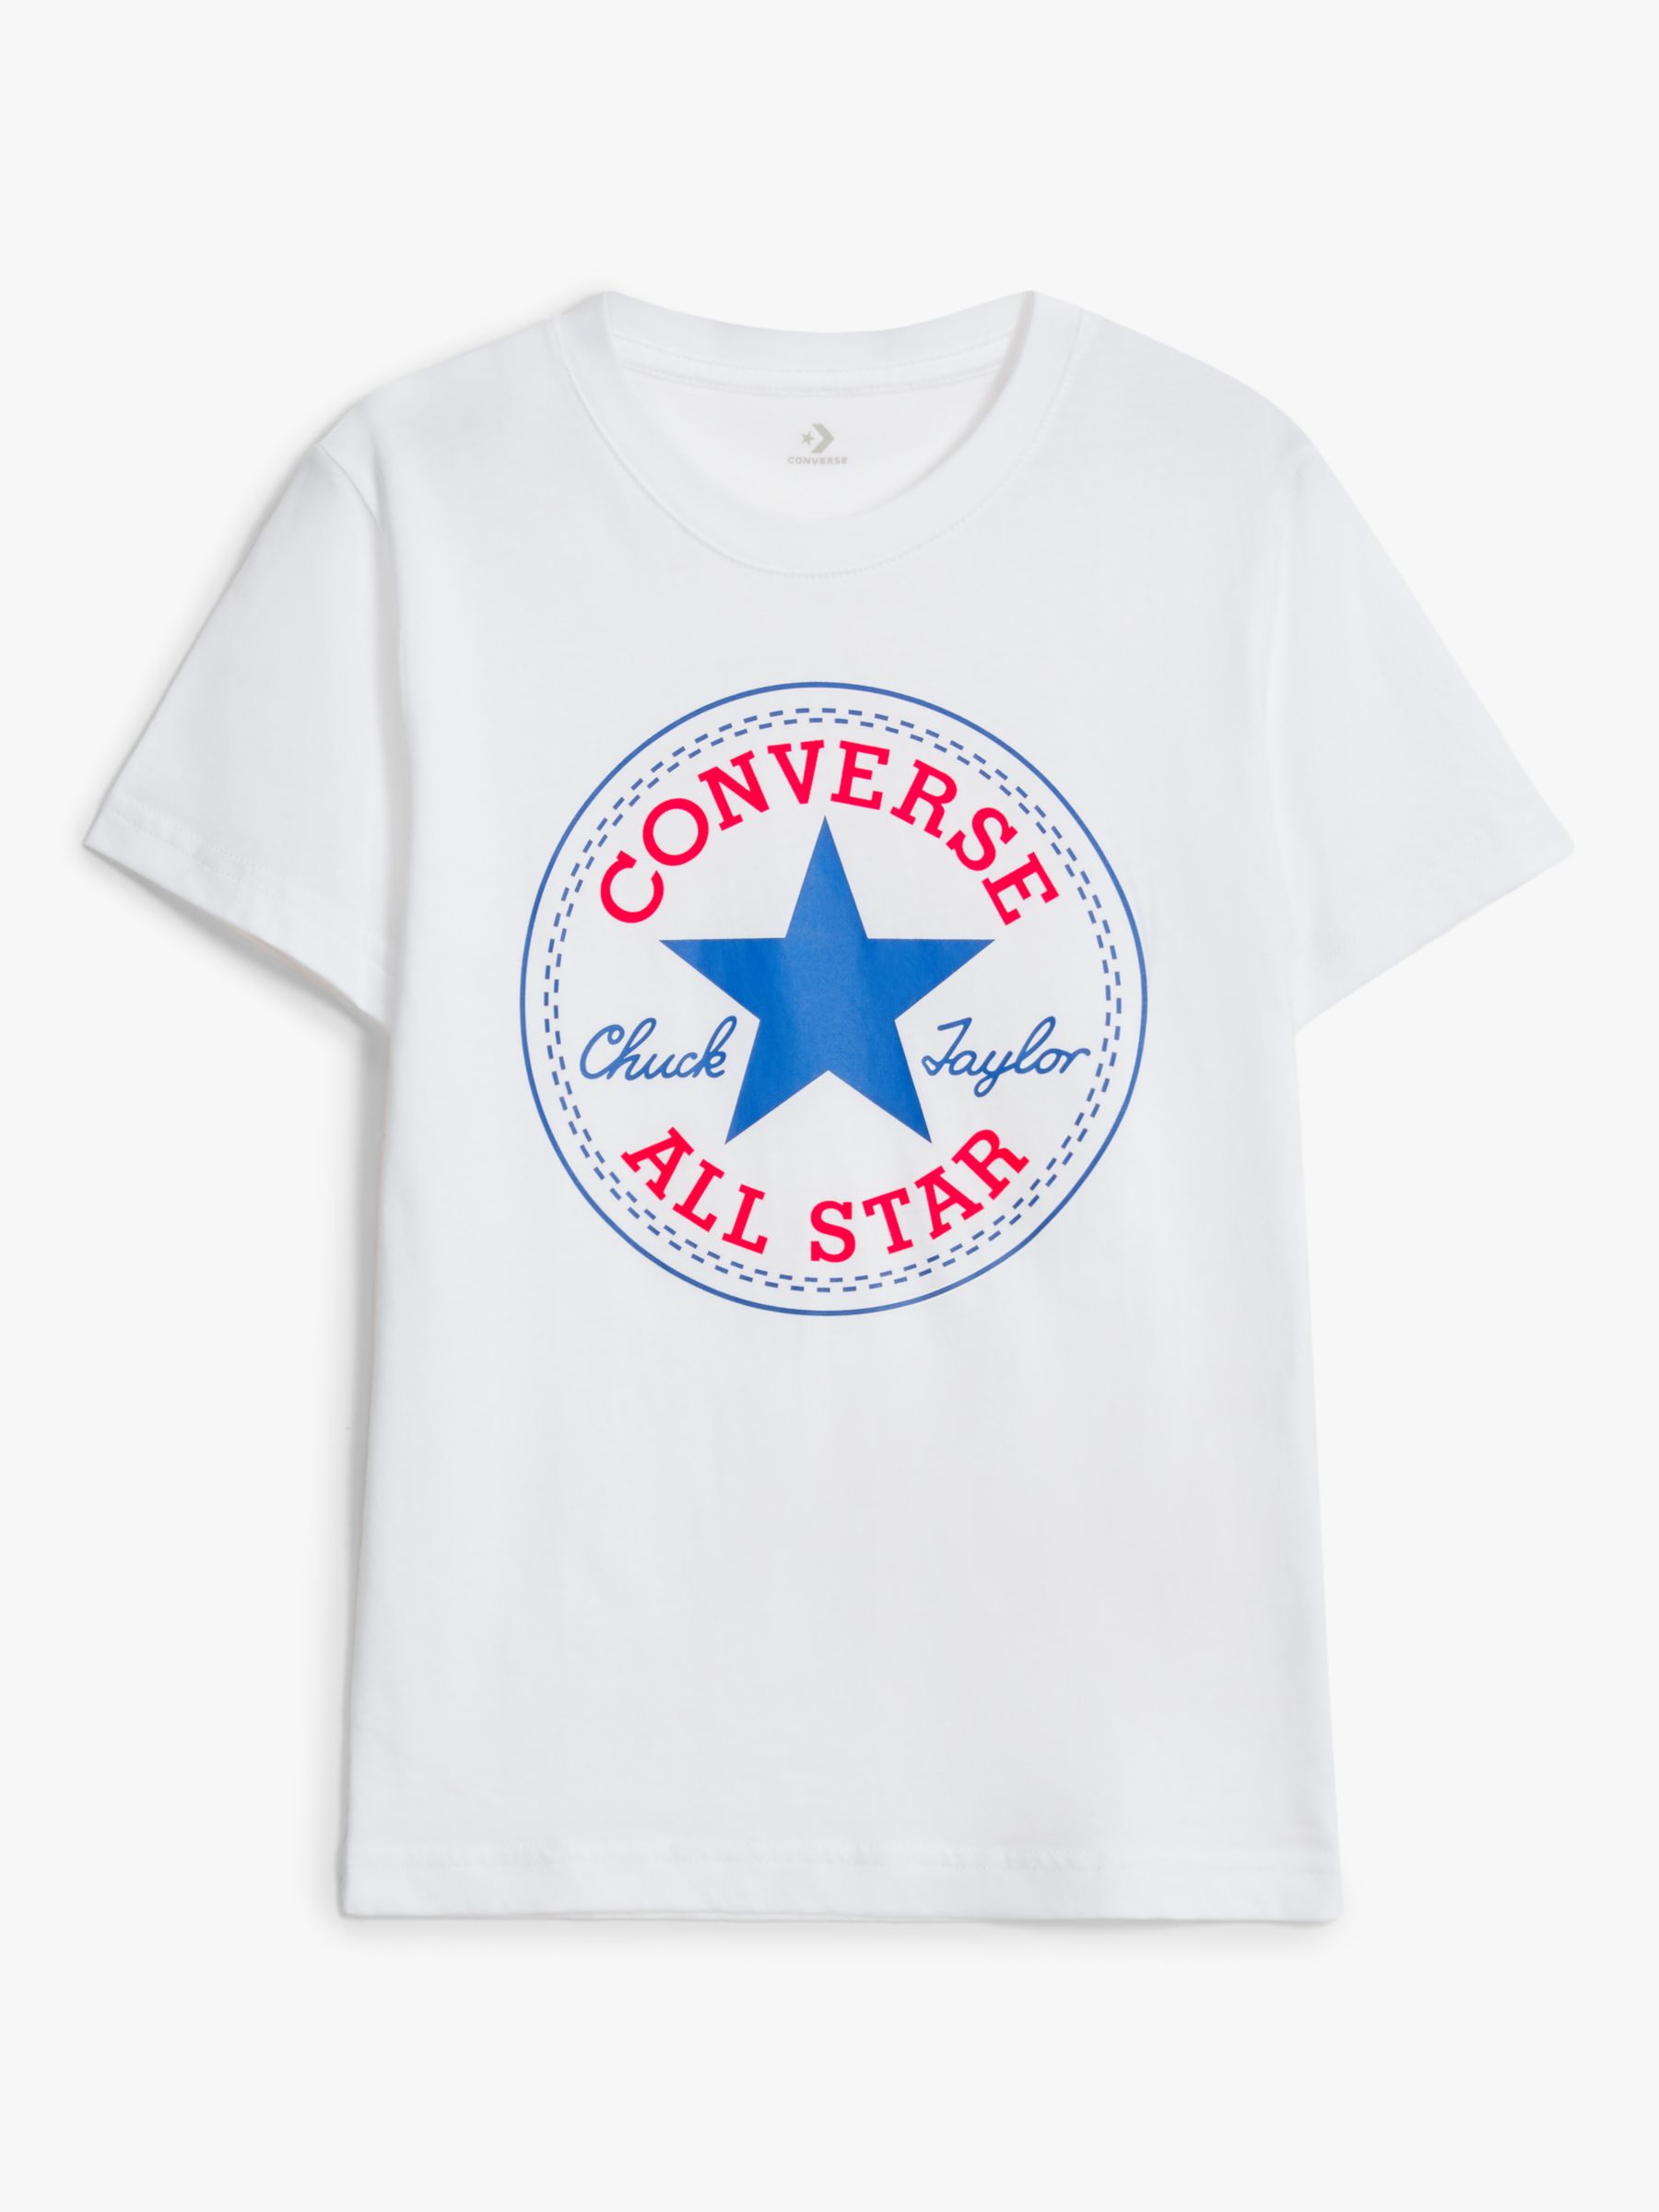 CONVERSE SHOES Girls Size XL White Tee Shirt (13-15 years) Short Sleeve